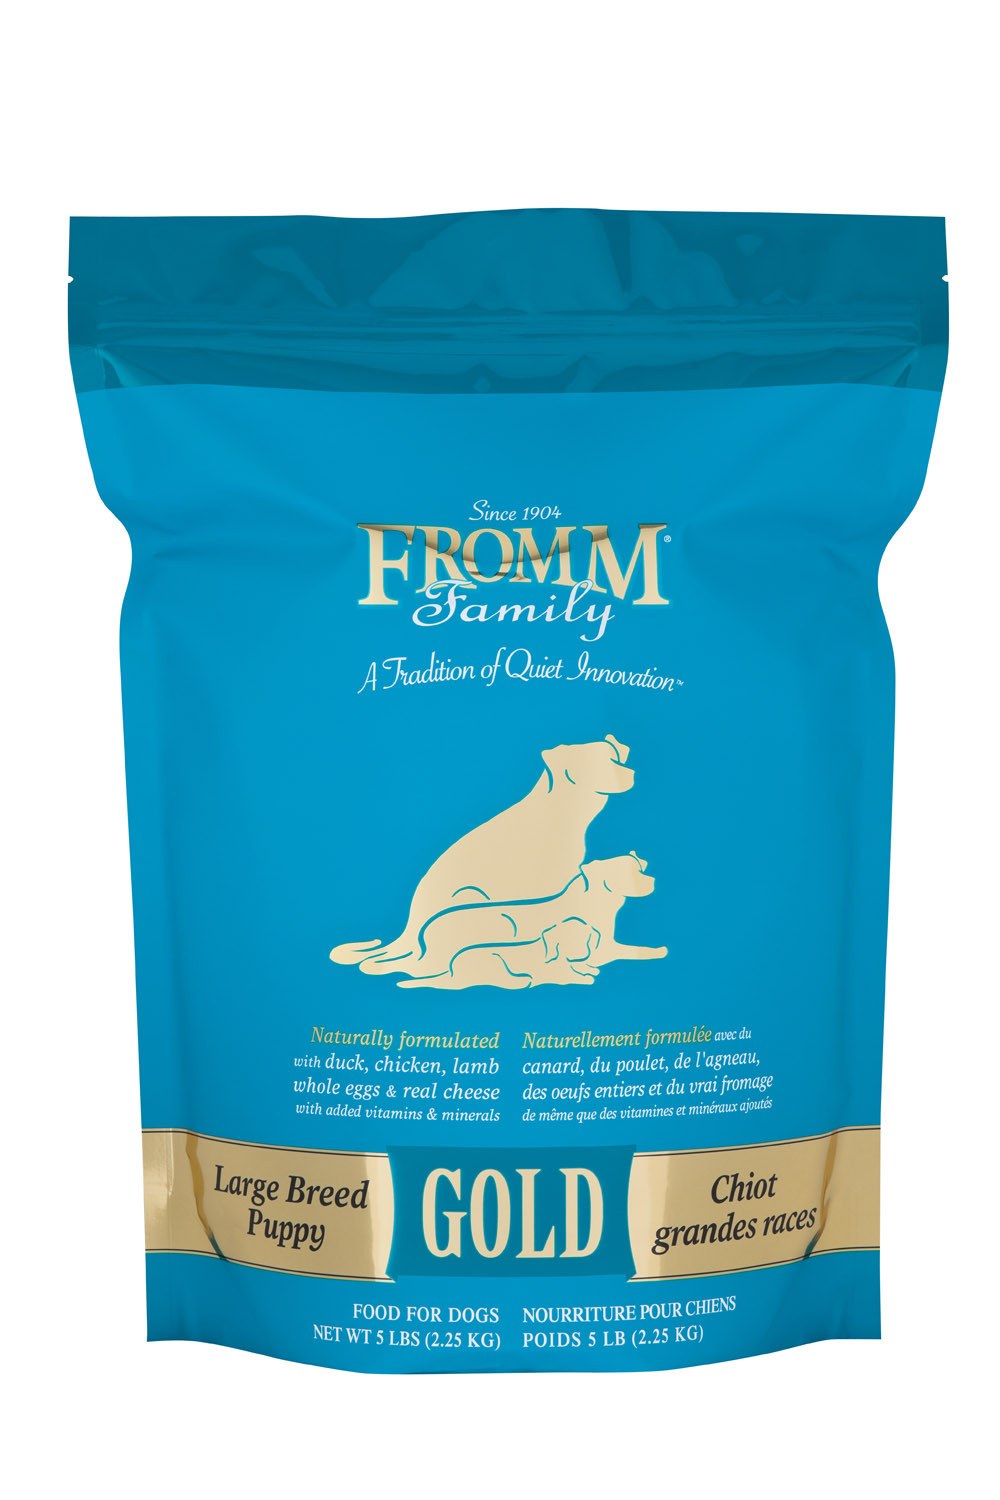 20 Top Photos Fromm Puppy Gold Large Breed : Fromm Gold Large Breed Puppy Dry Dog Food (5 lb bag ...